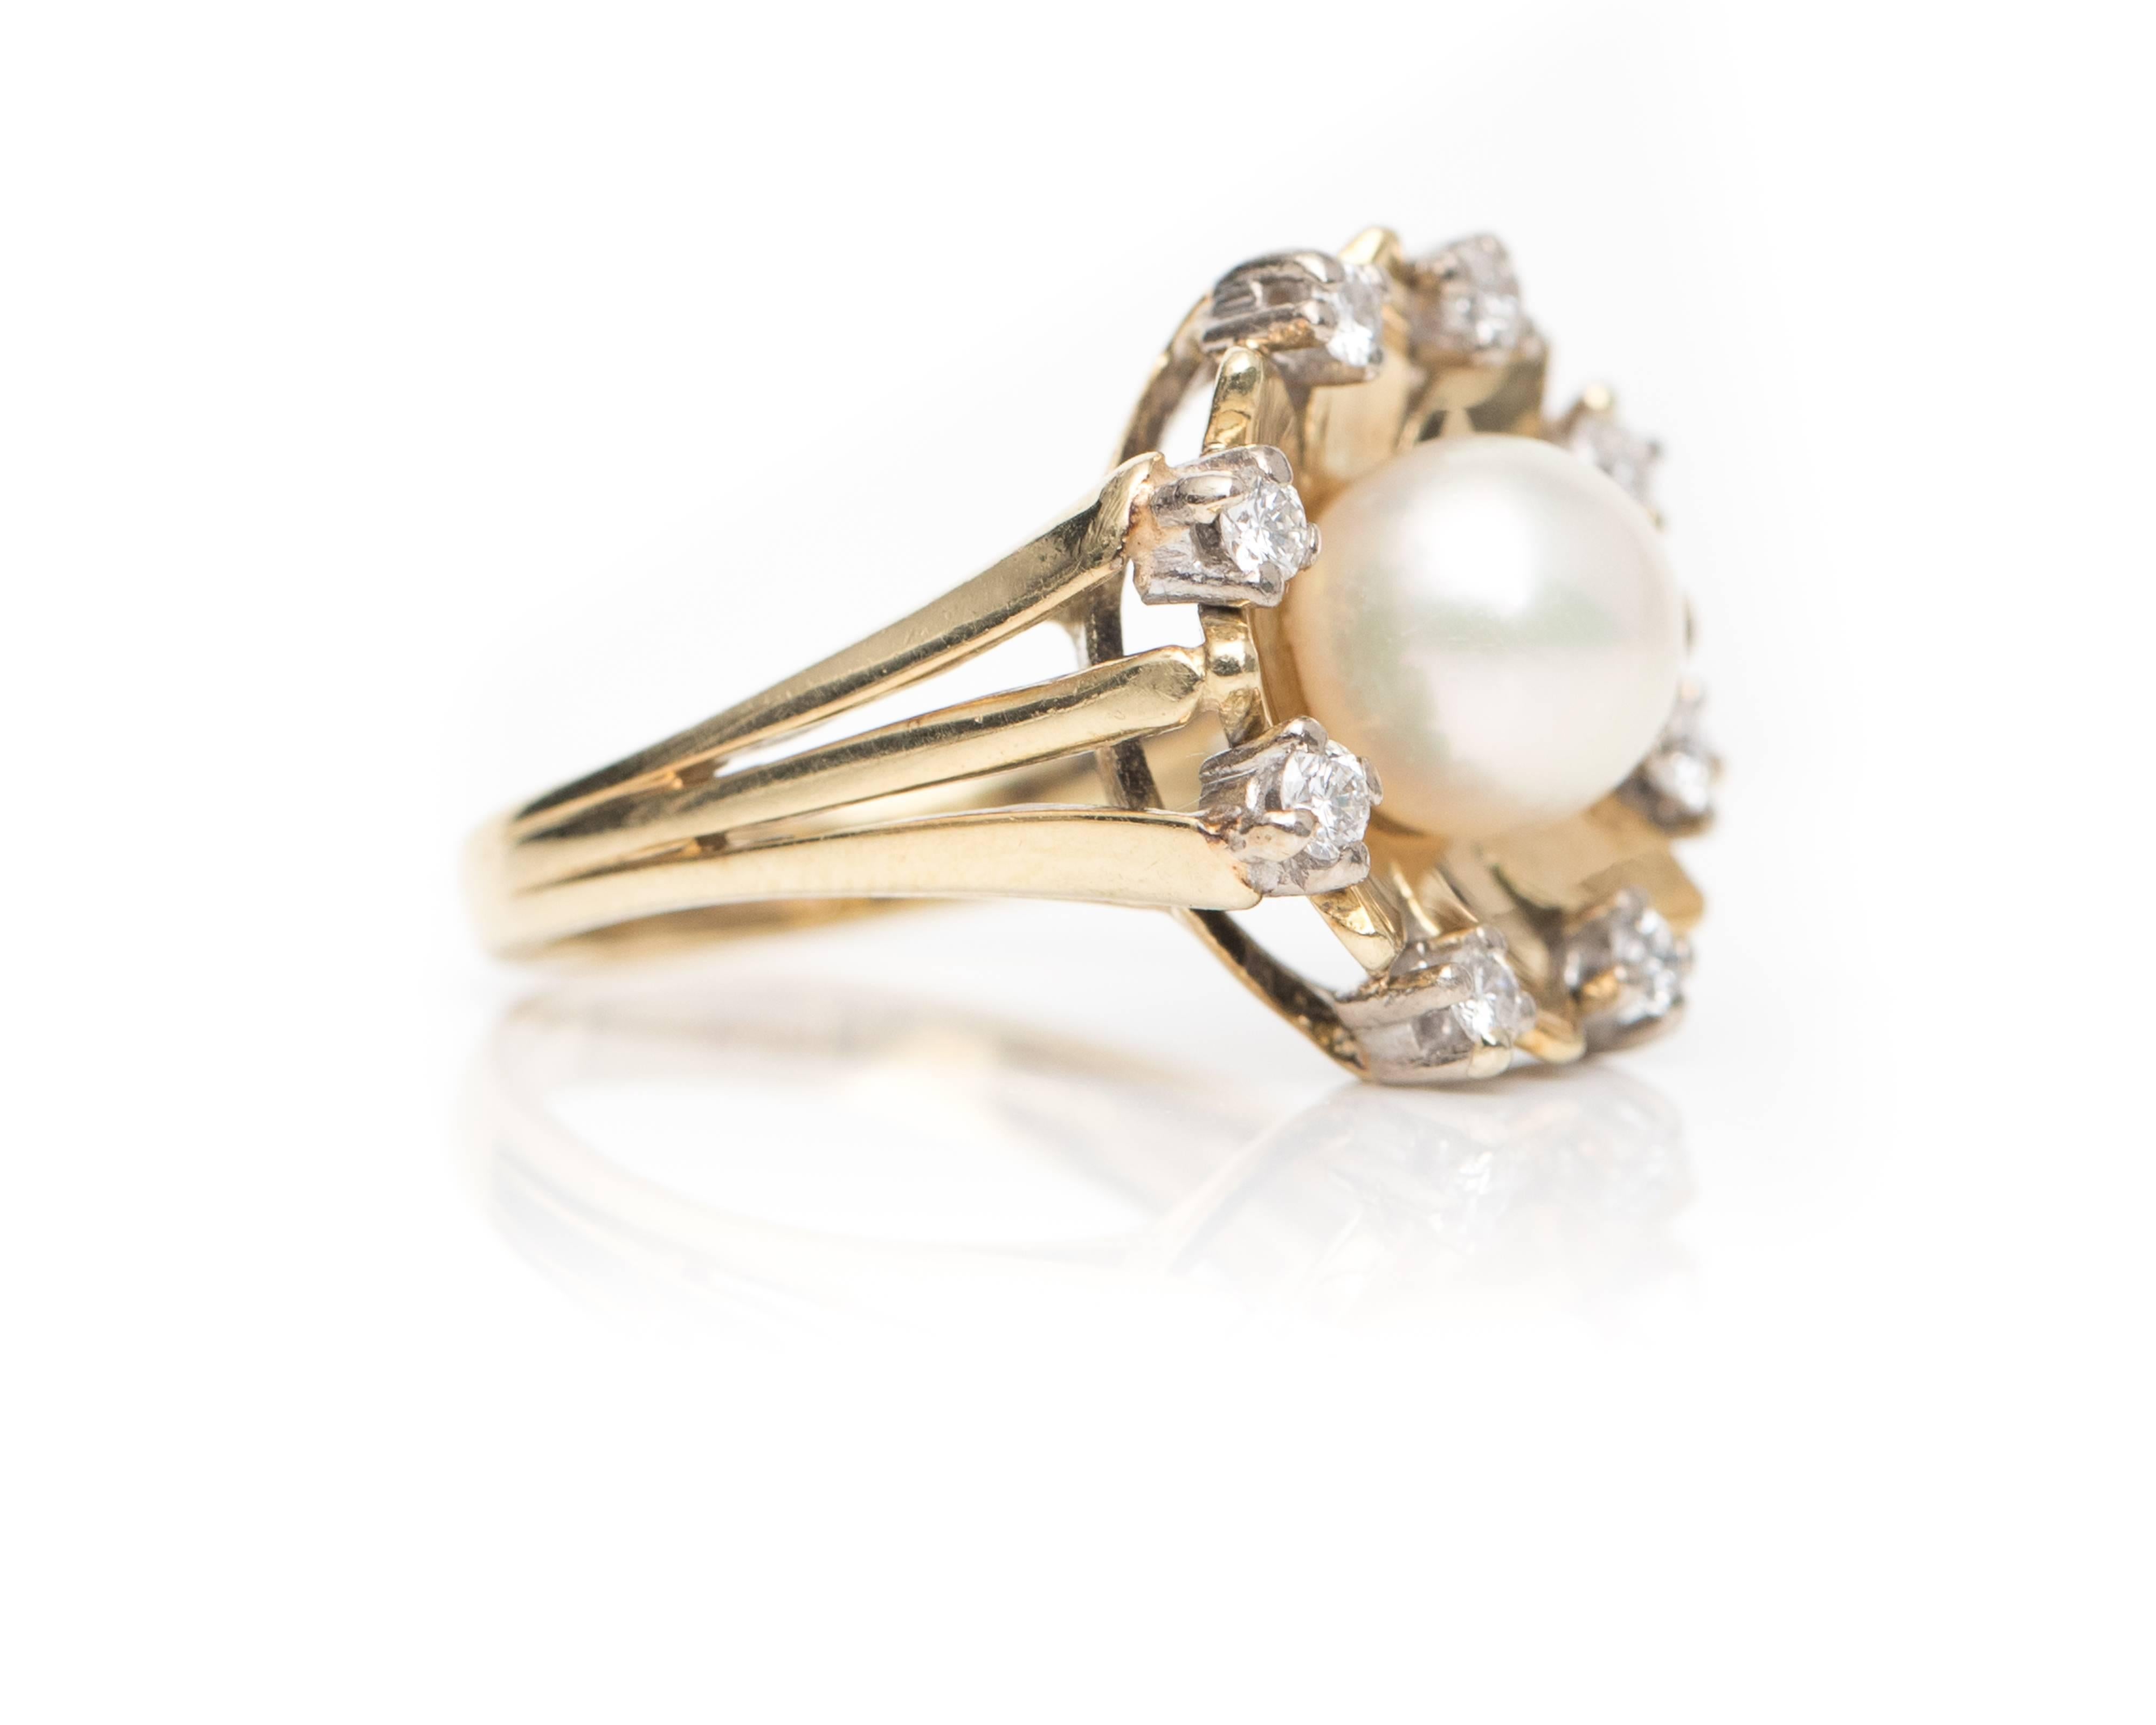 1960s Retro Pearl with Diamond Halo, 14 Karat Yellow Gold Ring. Features a 7 millimeter Pearl in a Floral motif setting. The Pearl is surrounded by 8 Gold Petals. A single, prong set Diamond separates each petal at the tip forming an 8 Diamond Halo.